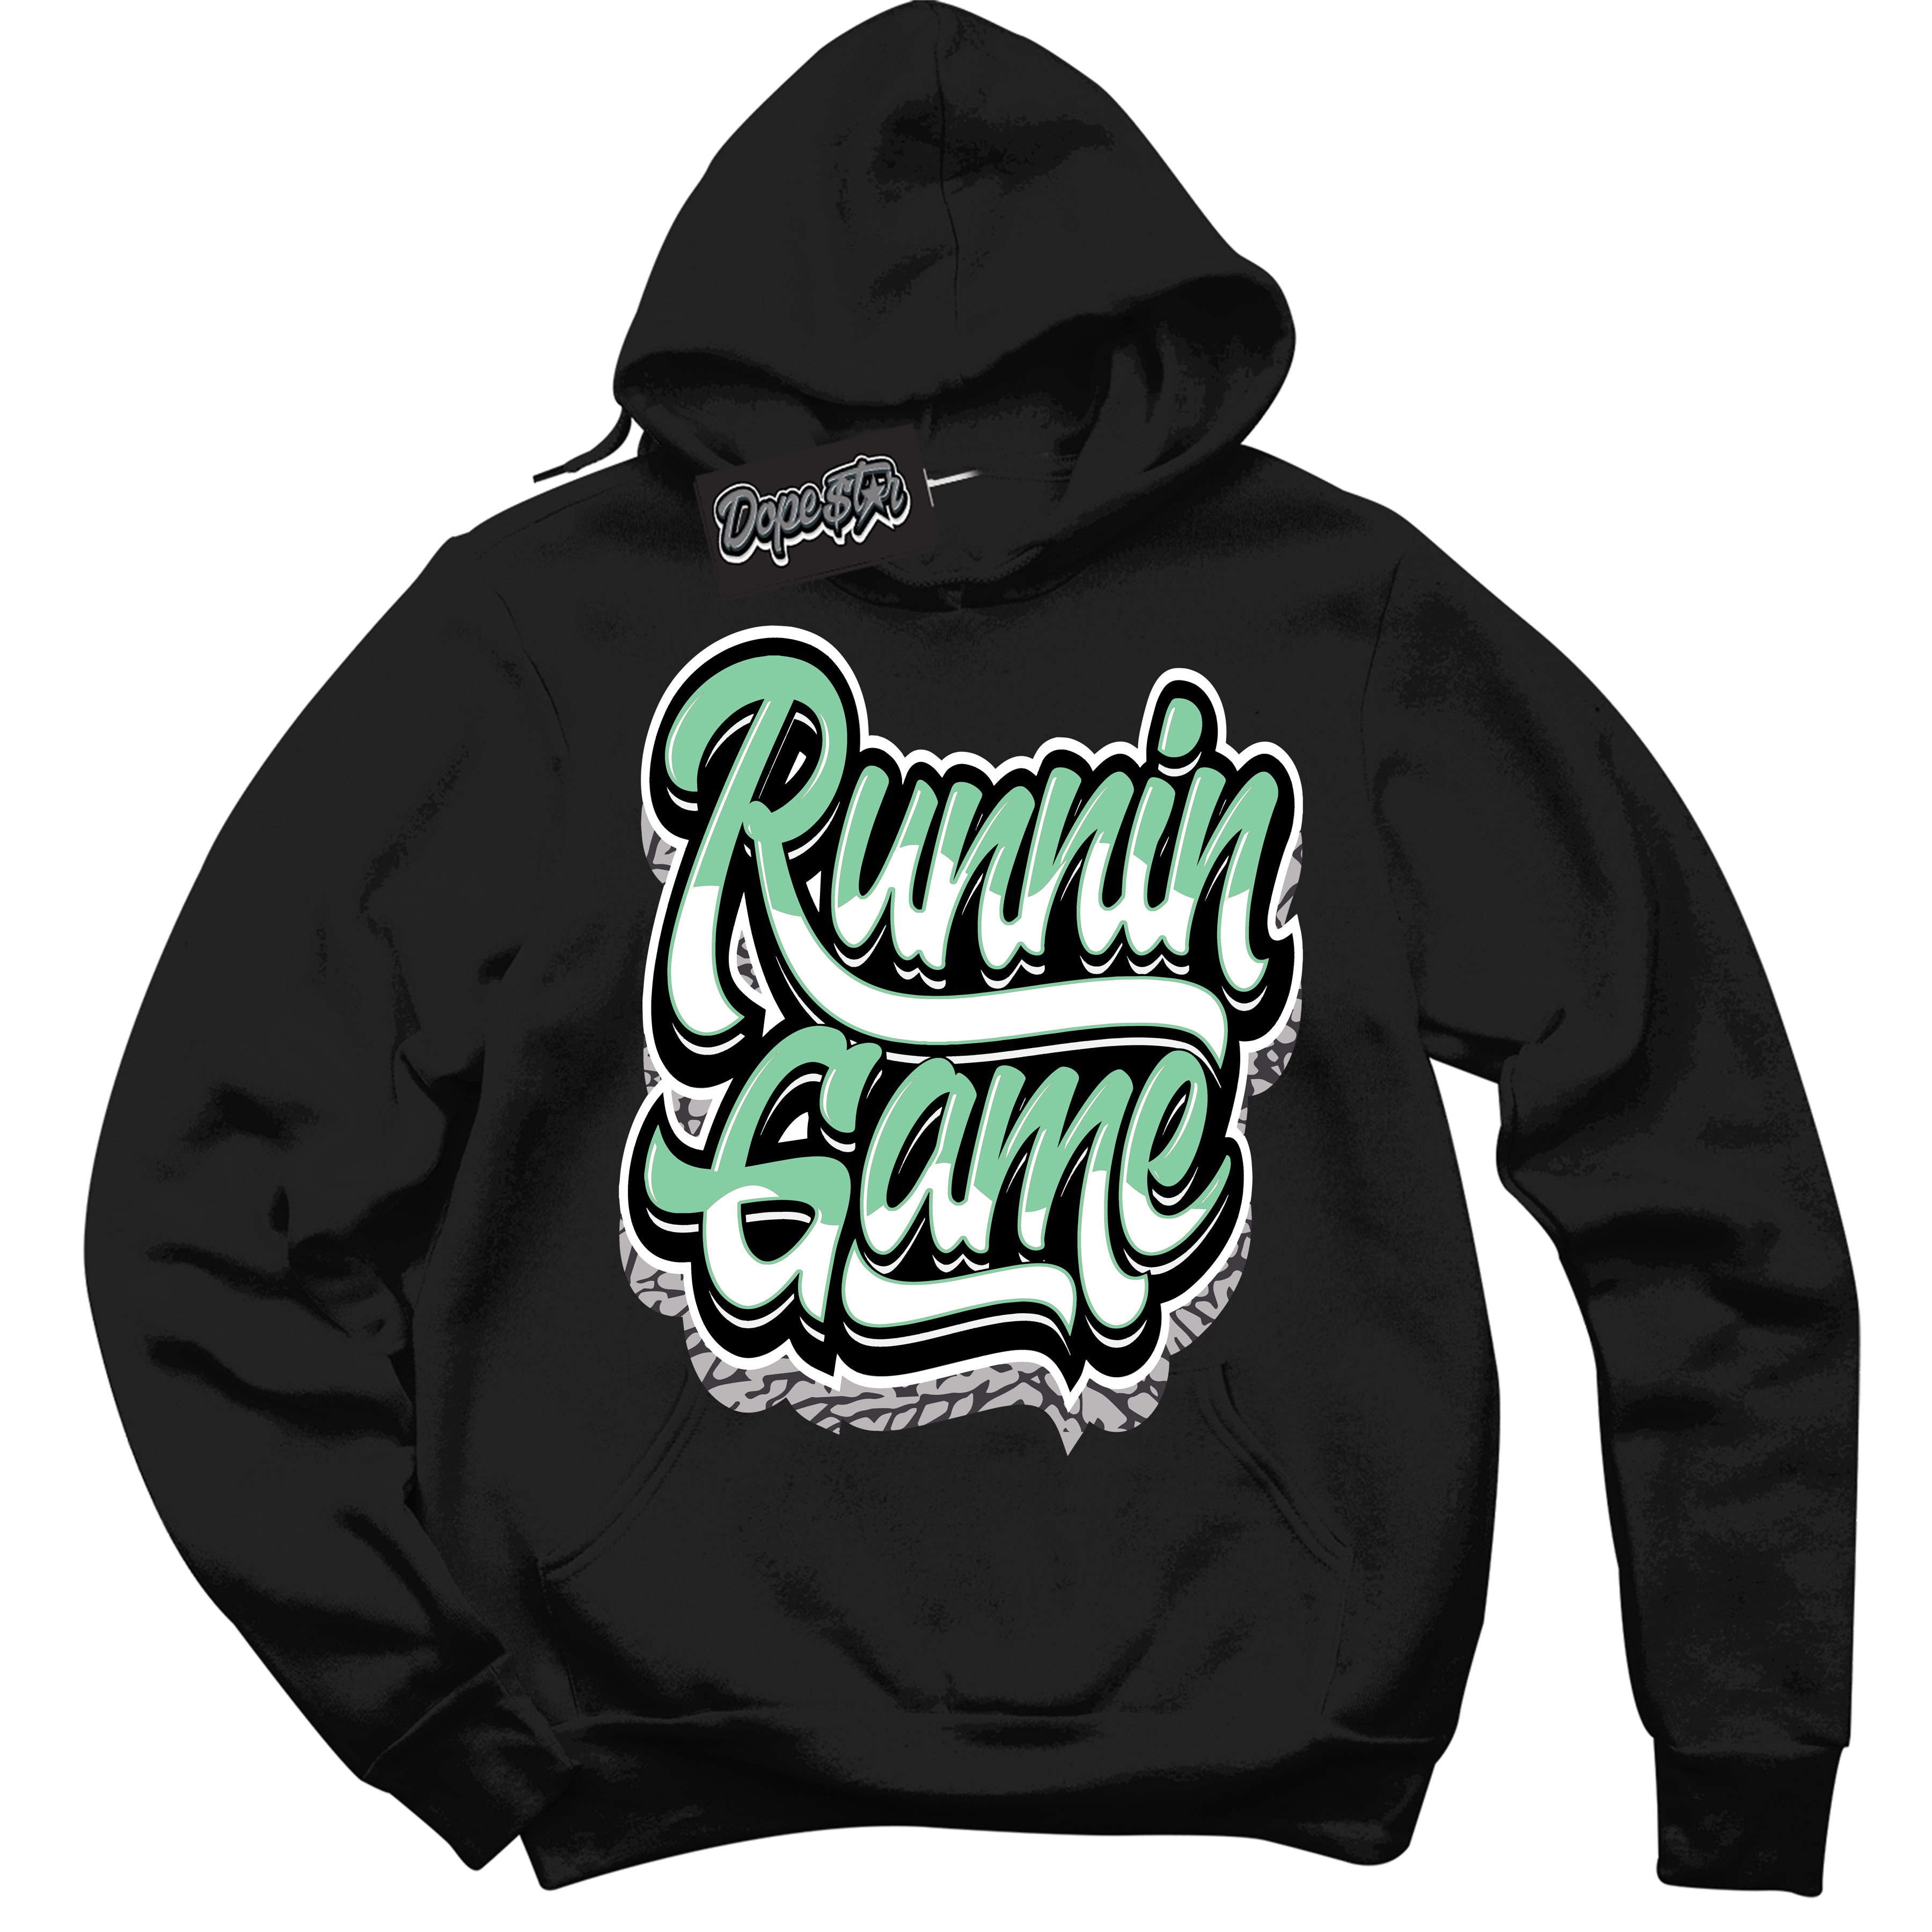 Cool Black Graphic DopeStar Hoodie with “ Running Game “ print, that perfectly matches Green Glow 3S sneakers